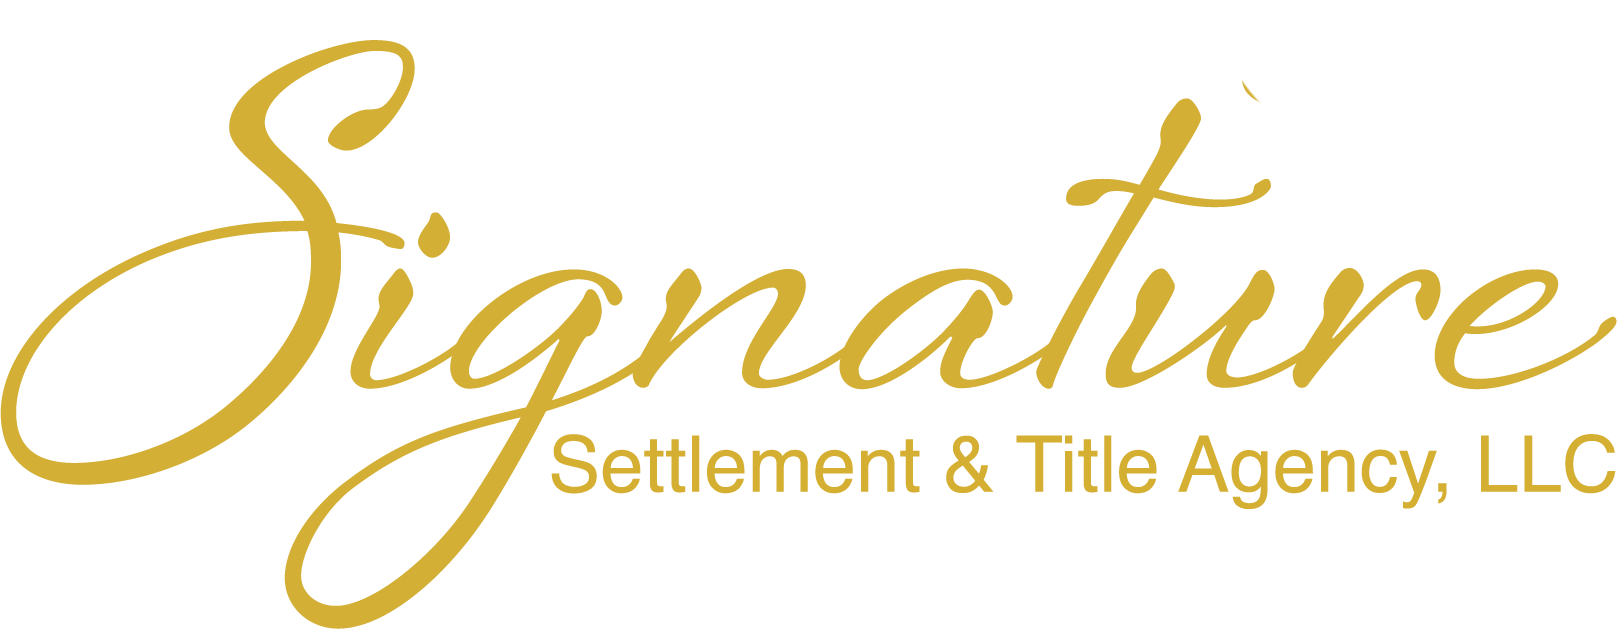 A black and gold logo for signature settlement & title company.